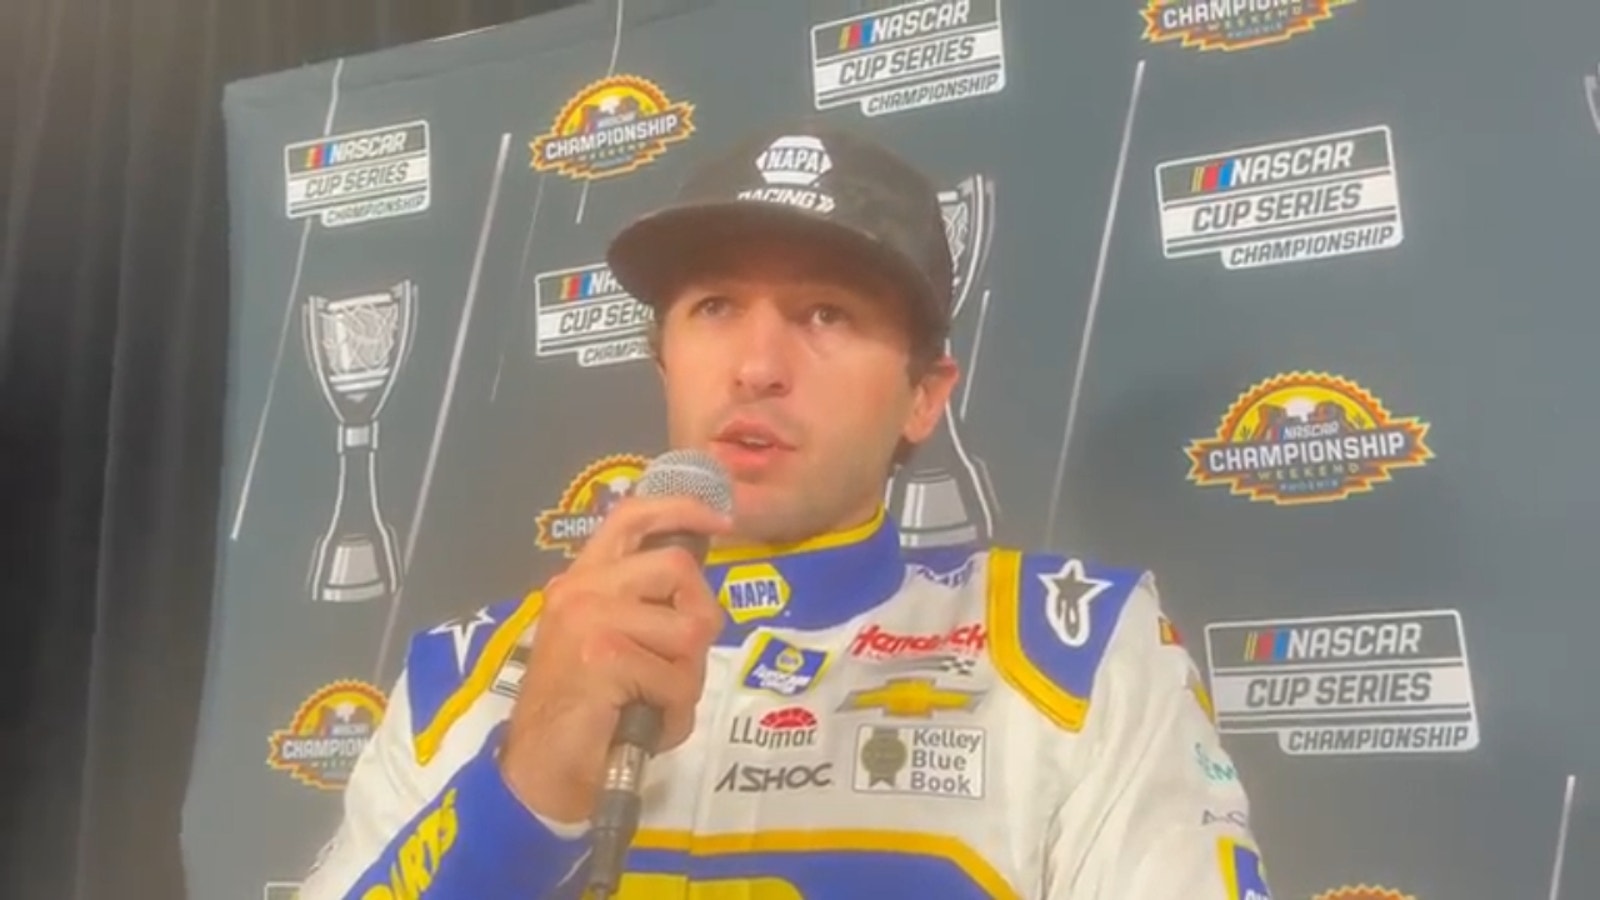 Chase Elliott on his thoughts heading into the NASCAR Championship